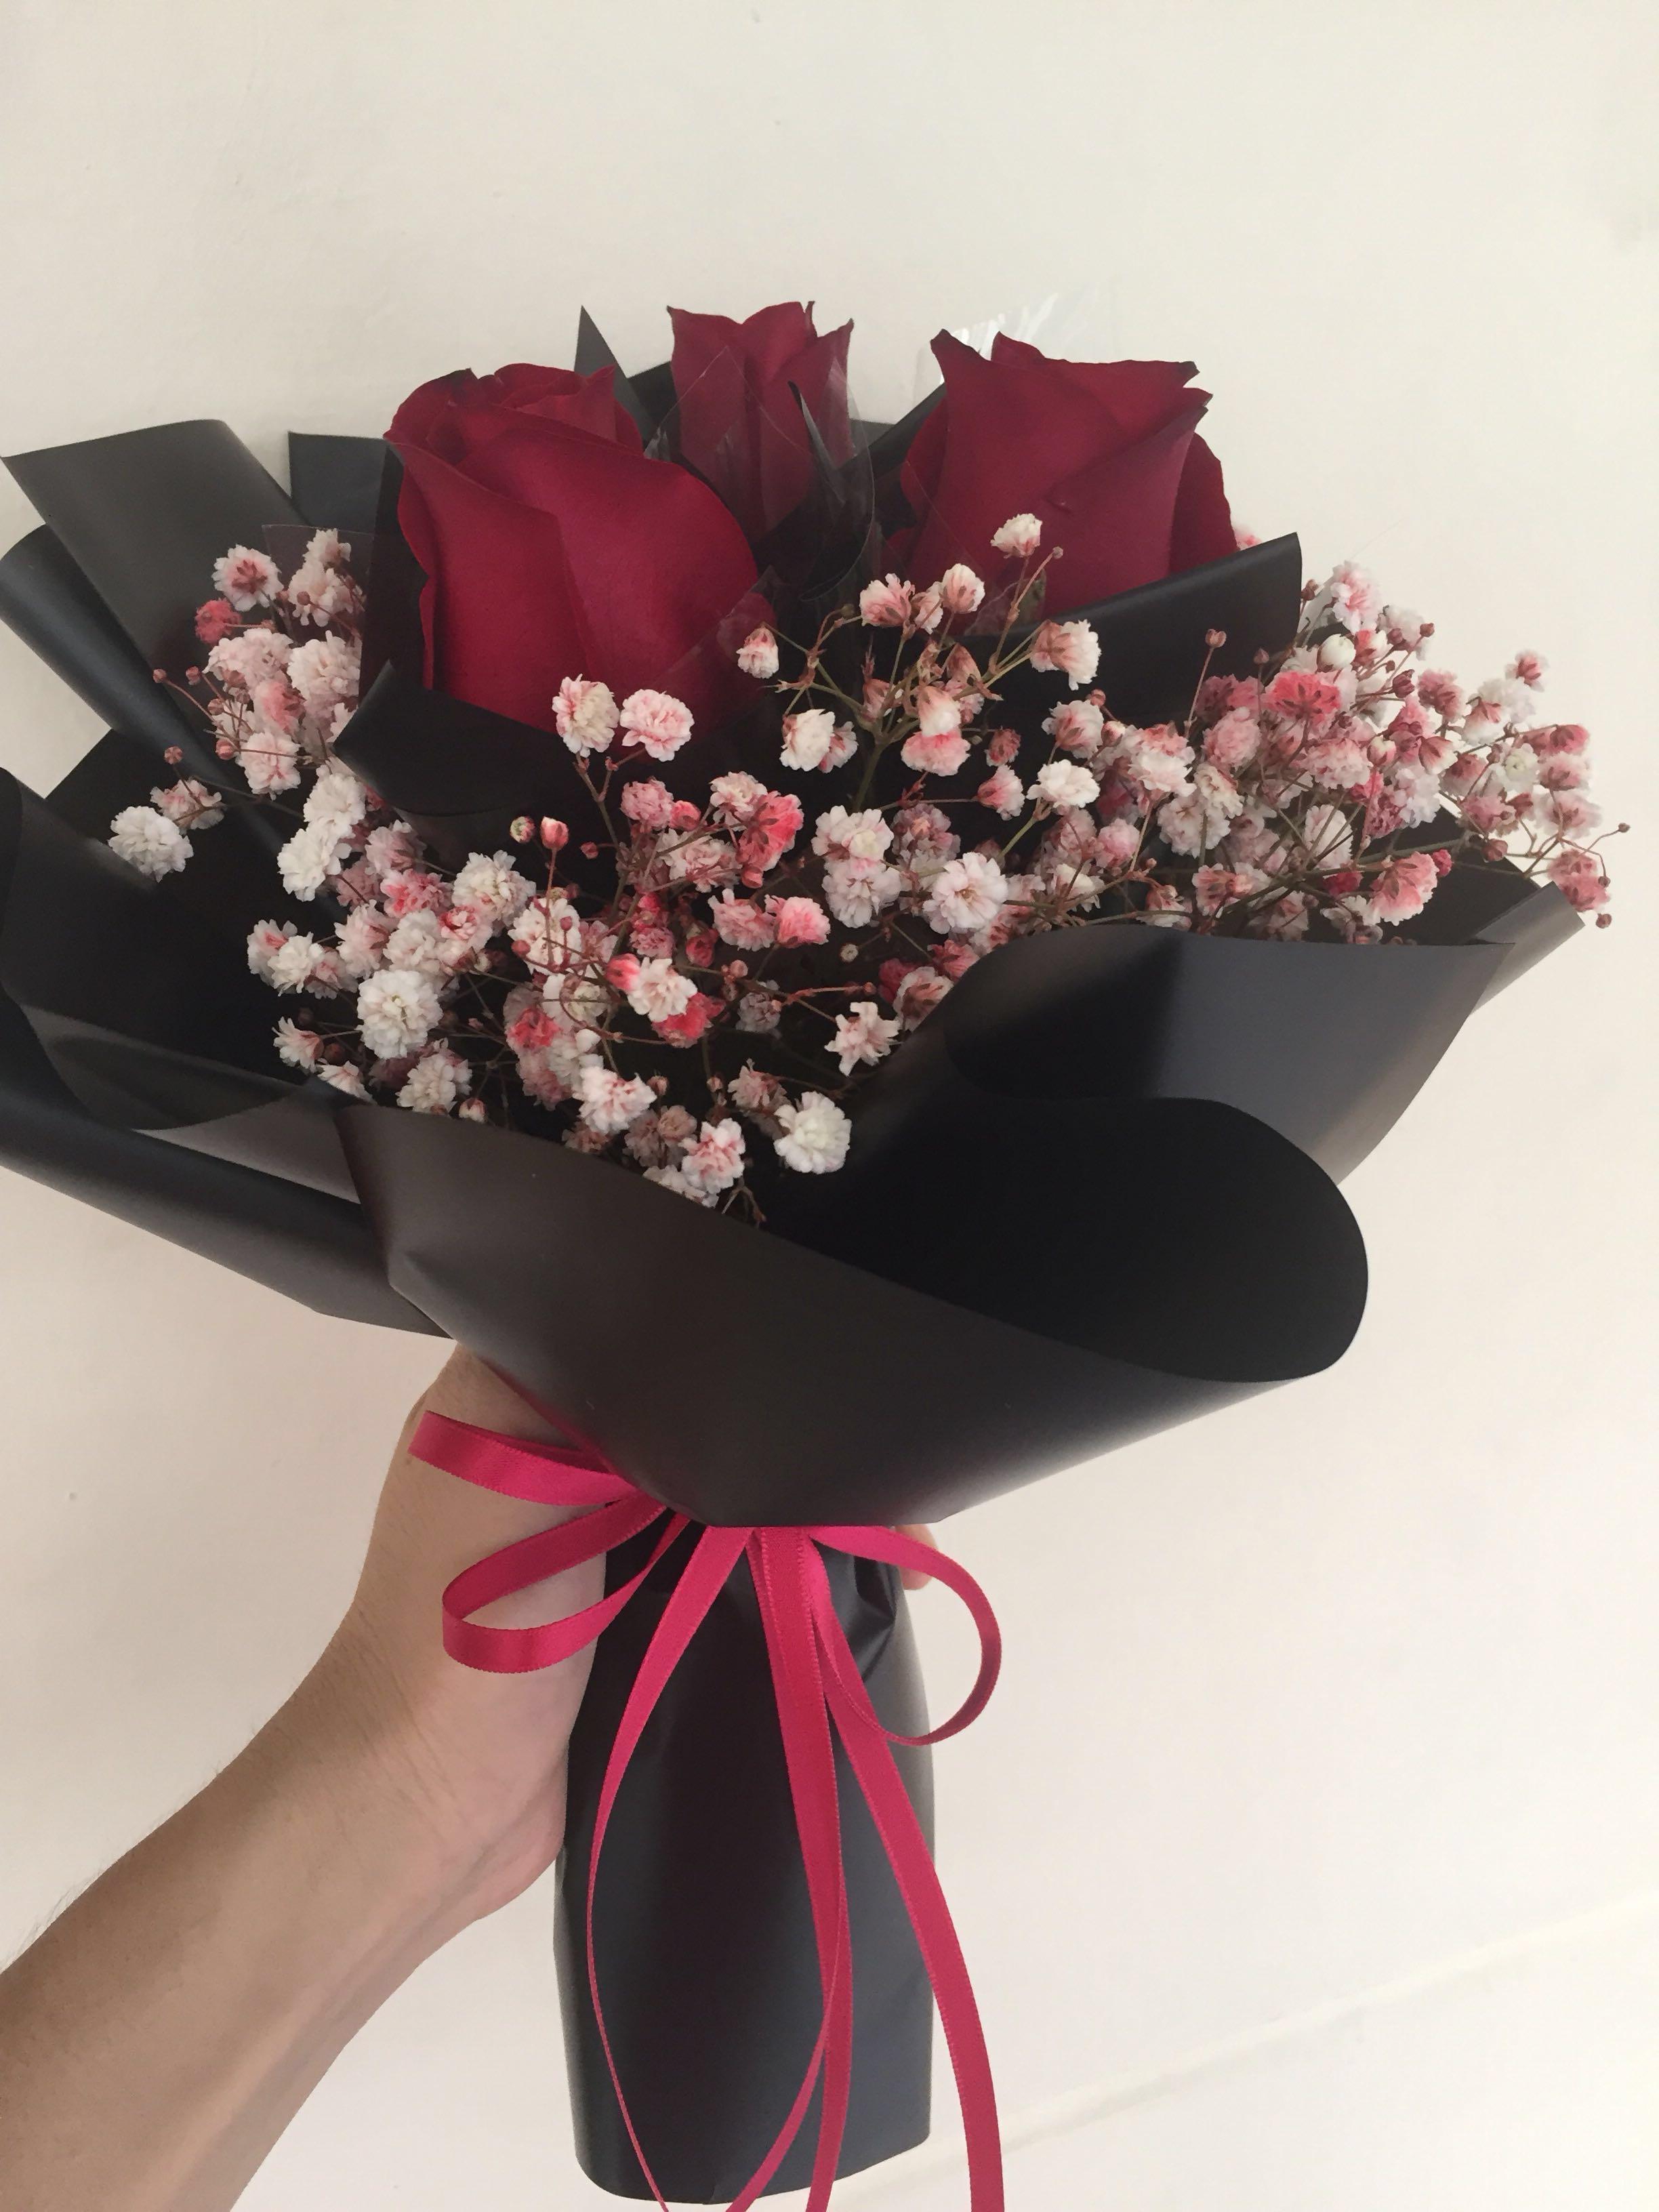 Birthday Day roses/ roses bouquet/3 roses bouquet/ roses bouquet /red roses  / flower/rose/花/9 roses/6 roses /12 roses /99 rose/ proposal  /ROM/Graduation, Hobbies & Toys, Stationery & Craft, Flowers & Bouquets on  Carousell